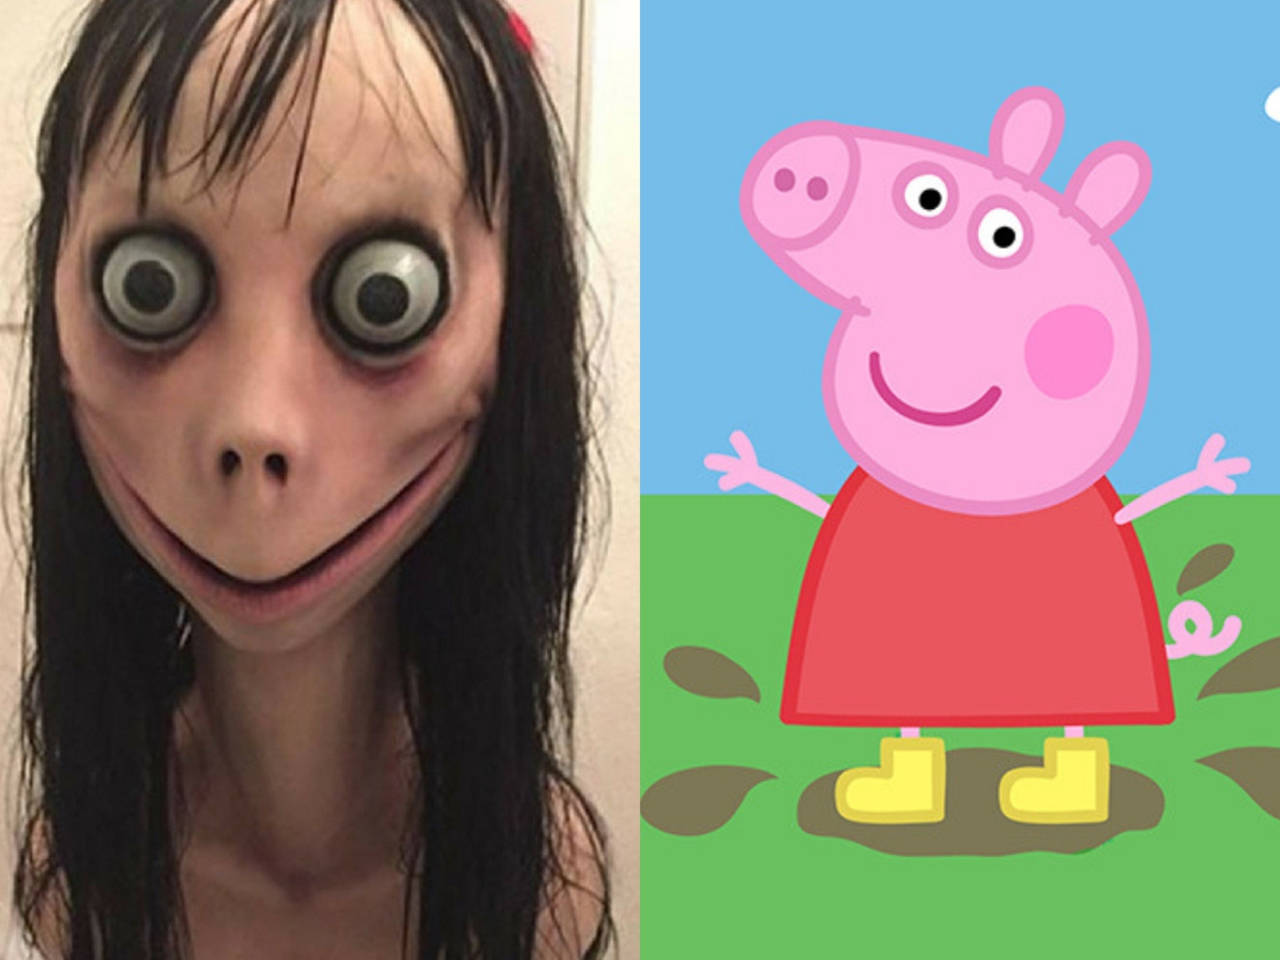 Parents, alert! The dangerous Momo challenge has hacked Peppa Pig videos on  YouTube! - Times of India